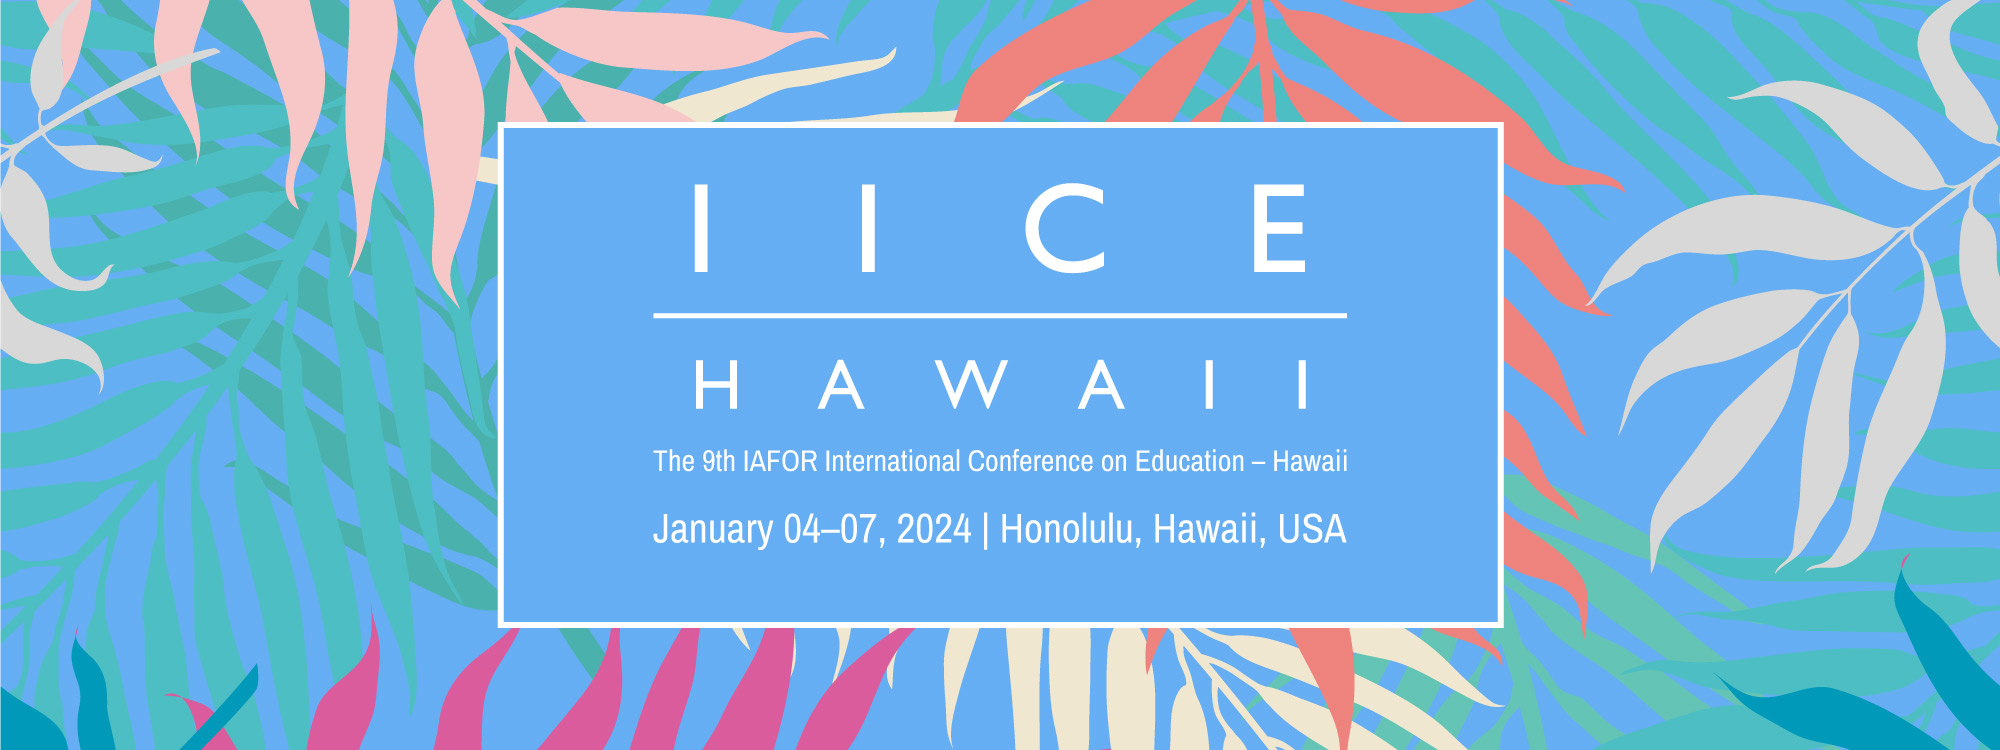 The 9th IAFOR International Conference on Education Hawaii